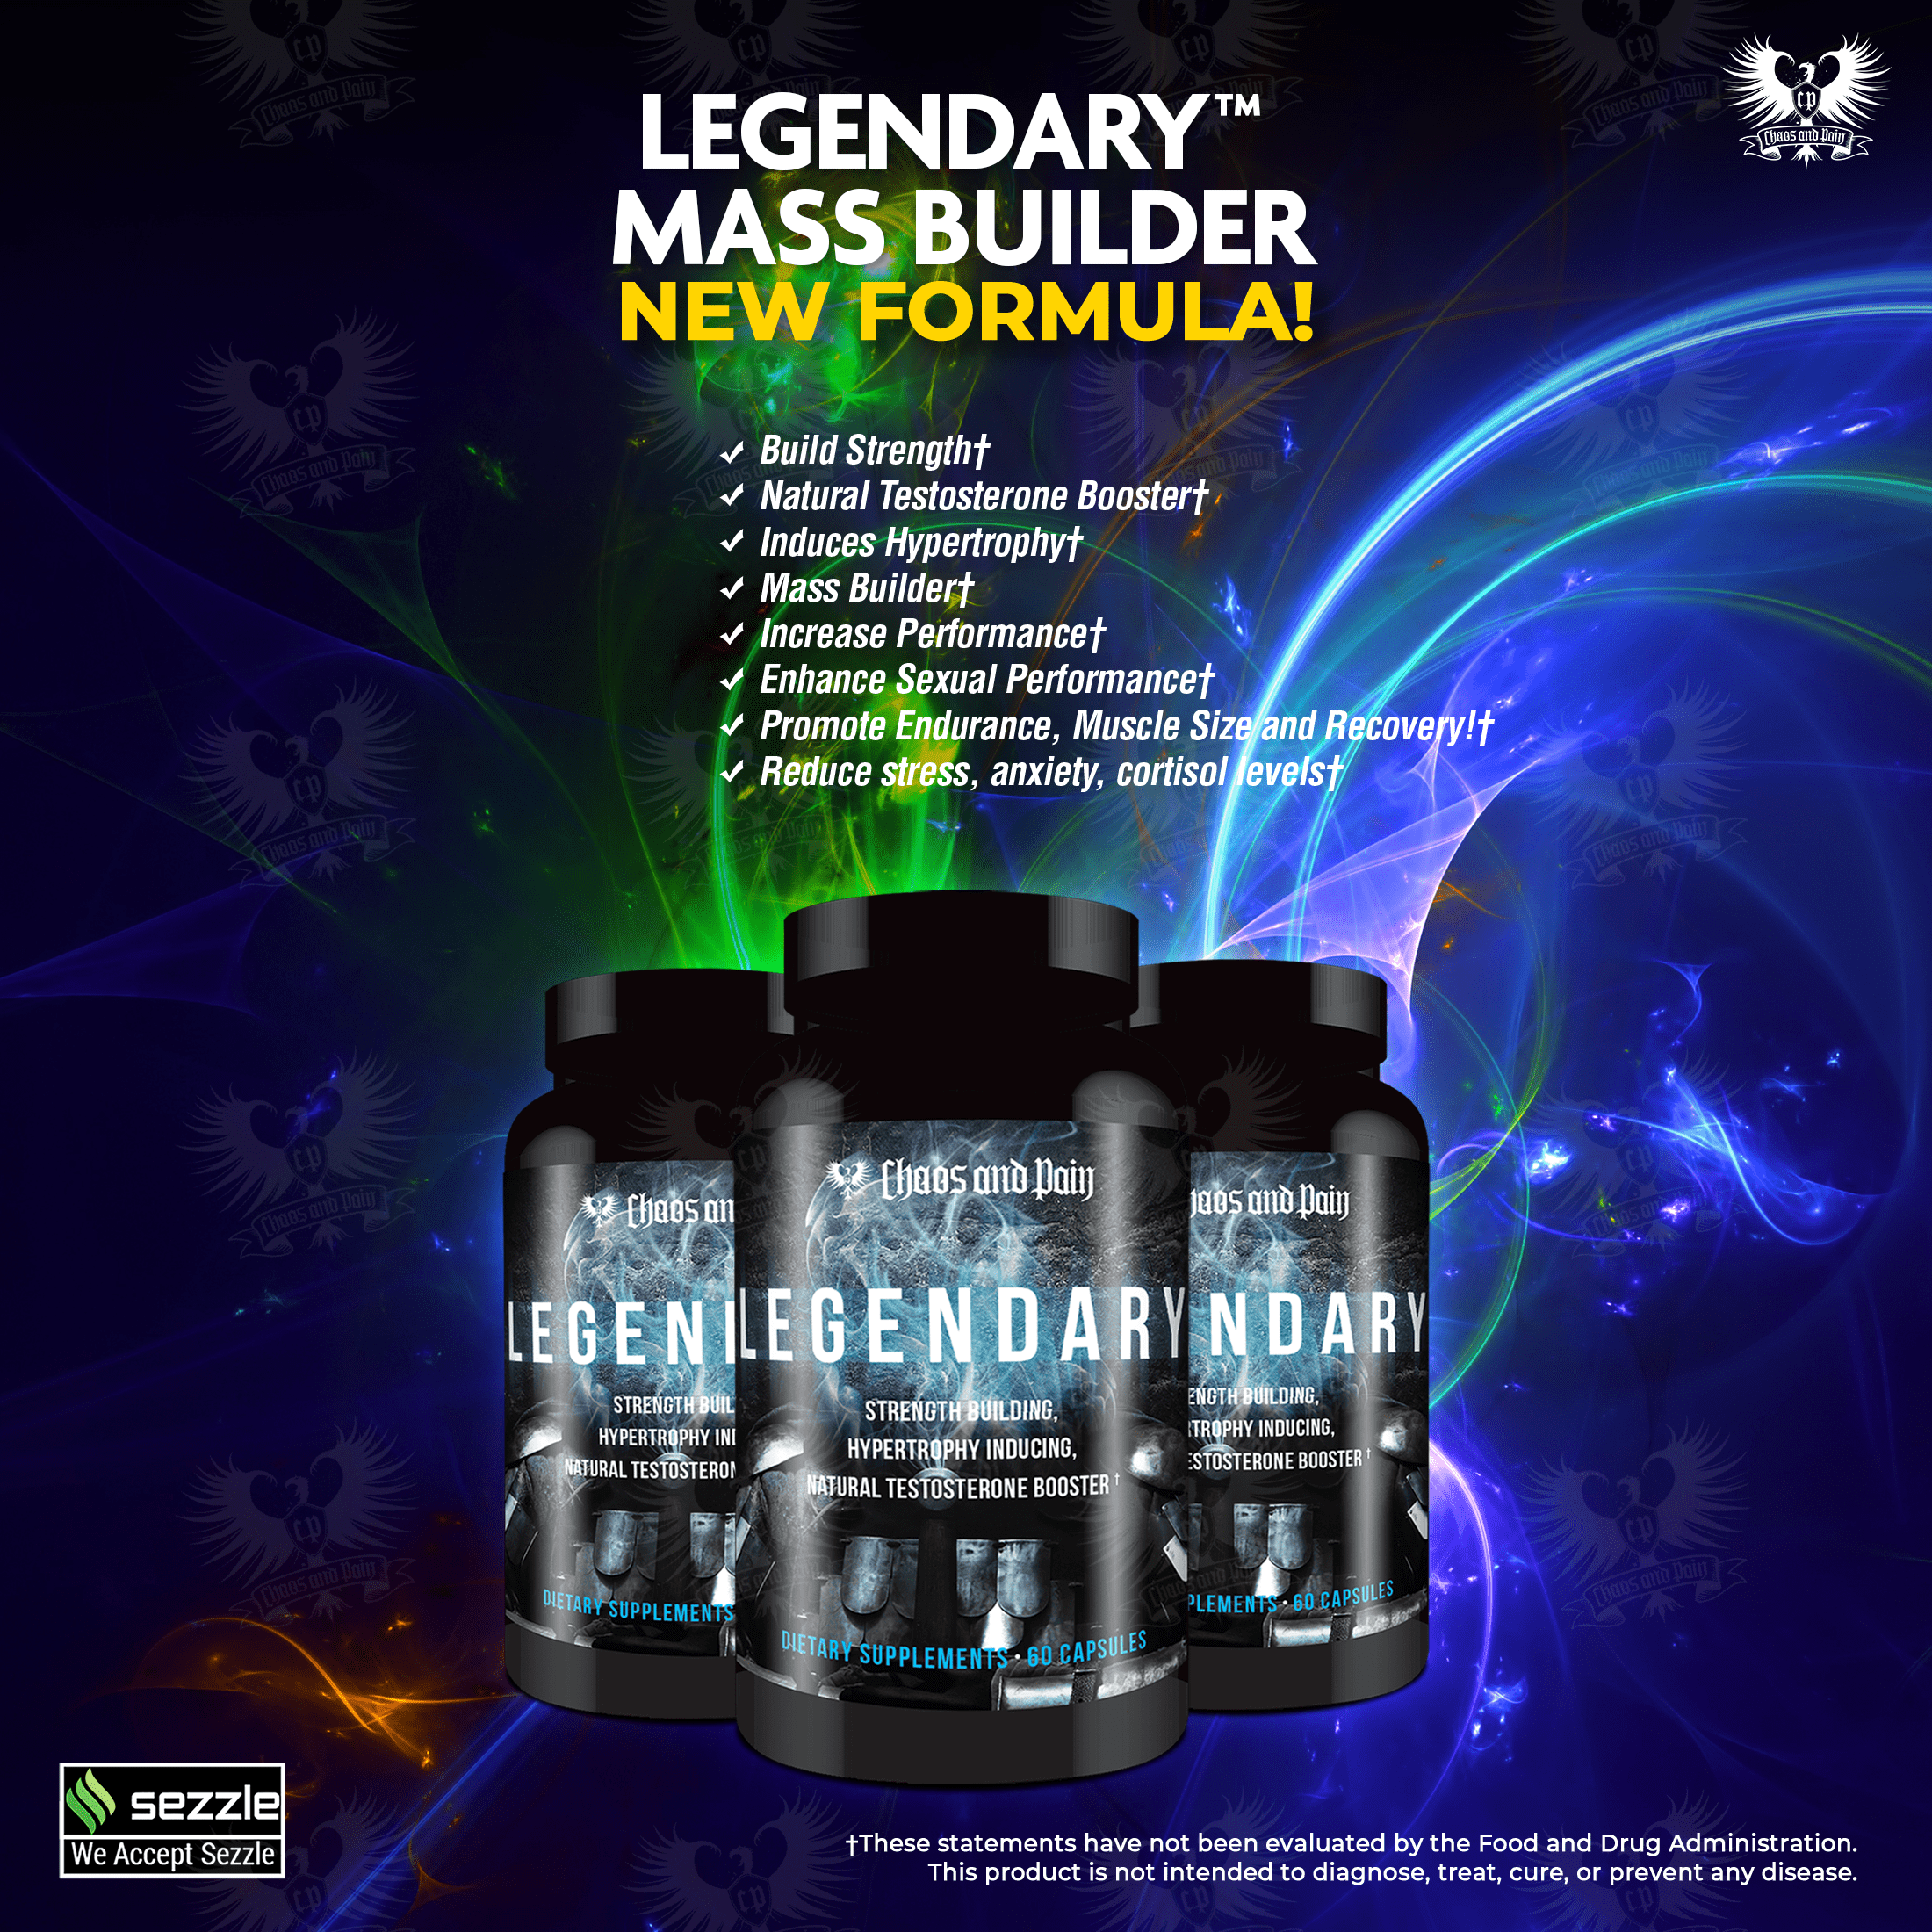 LEGENDARY™ MASS BUILDER in-page